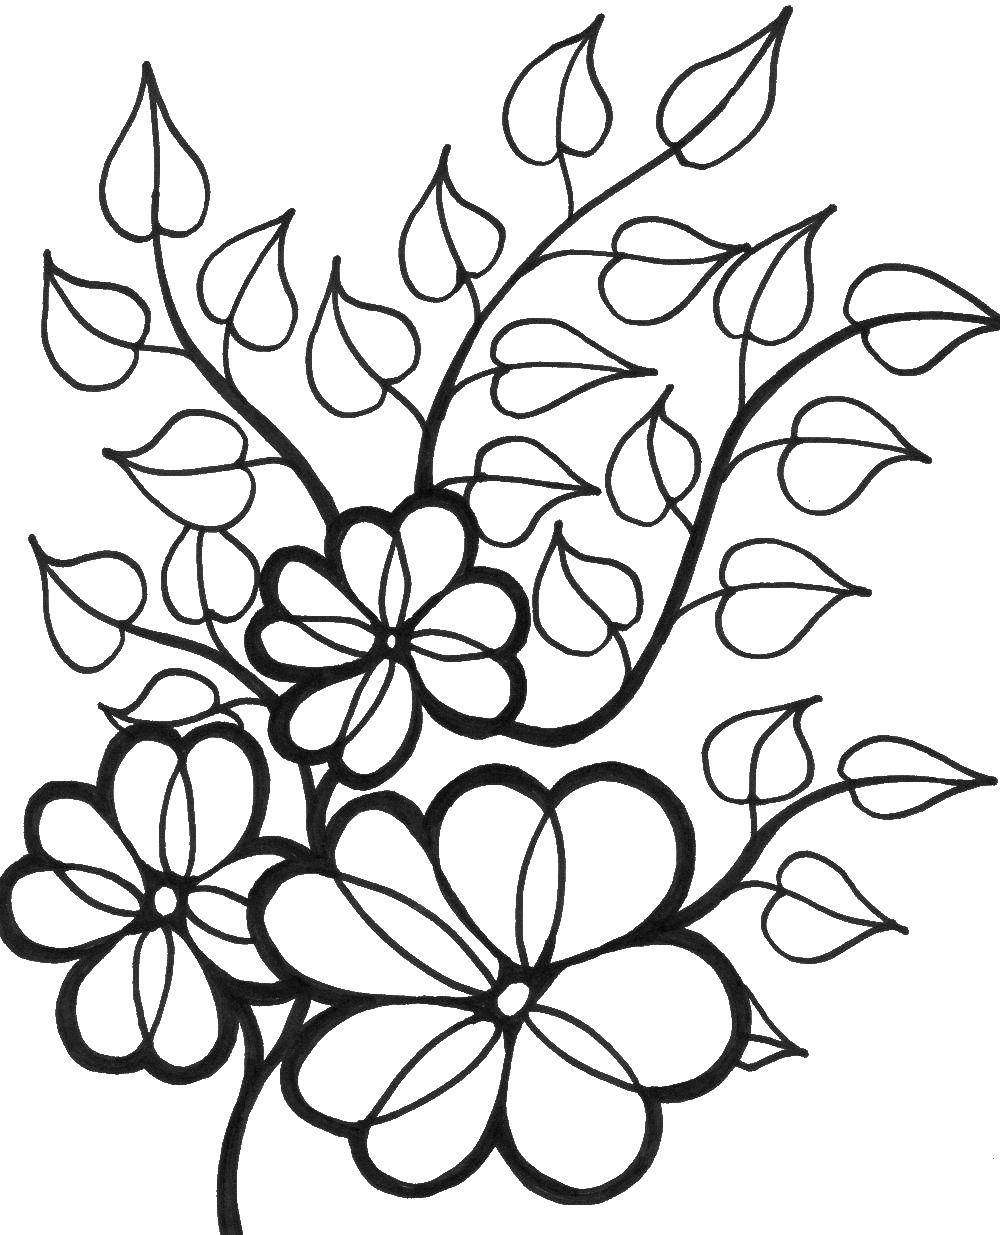 Coloring A beautiful Bush of flowers. Category flowers. Tags:  flowers.